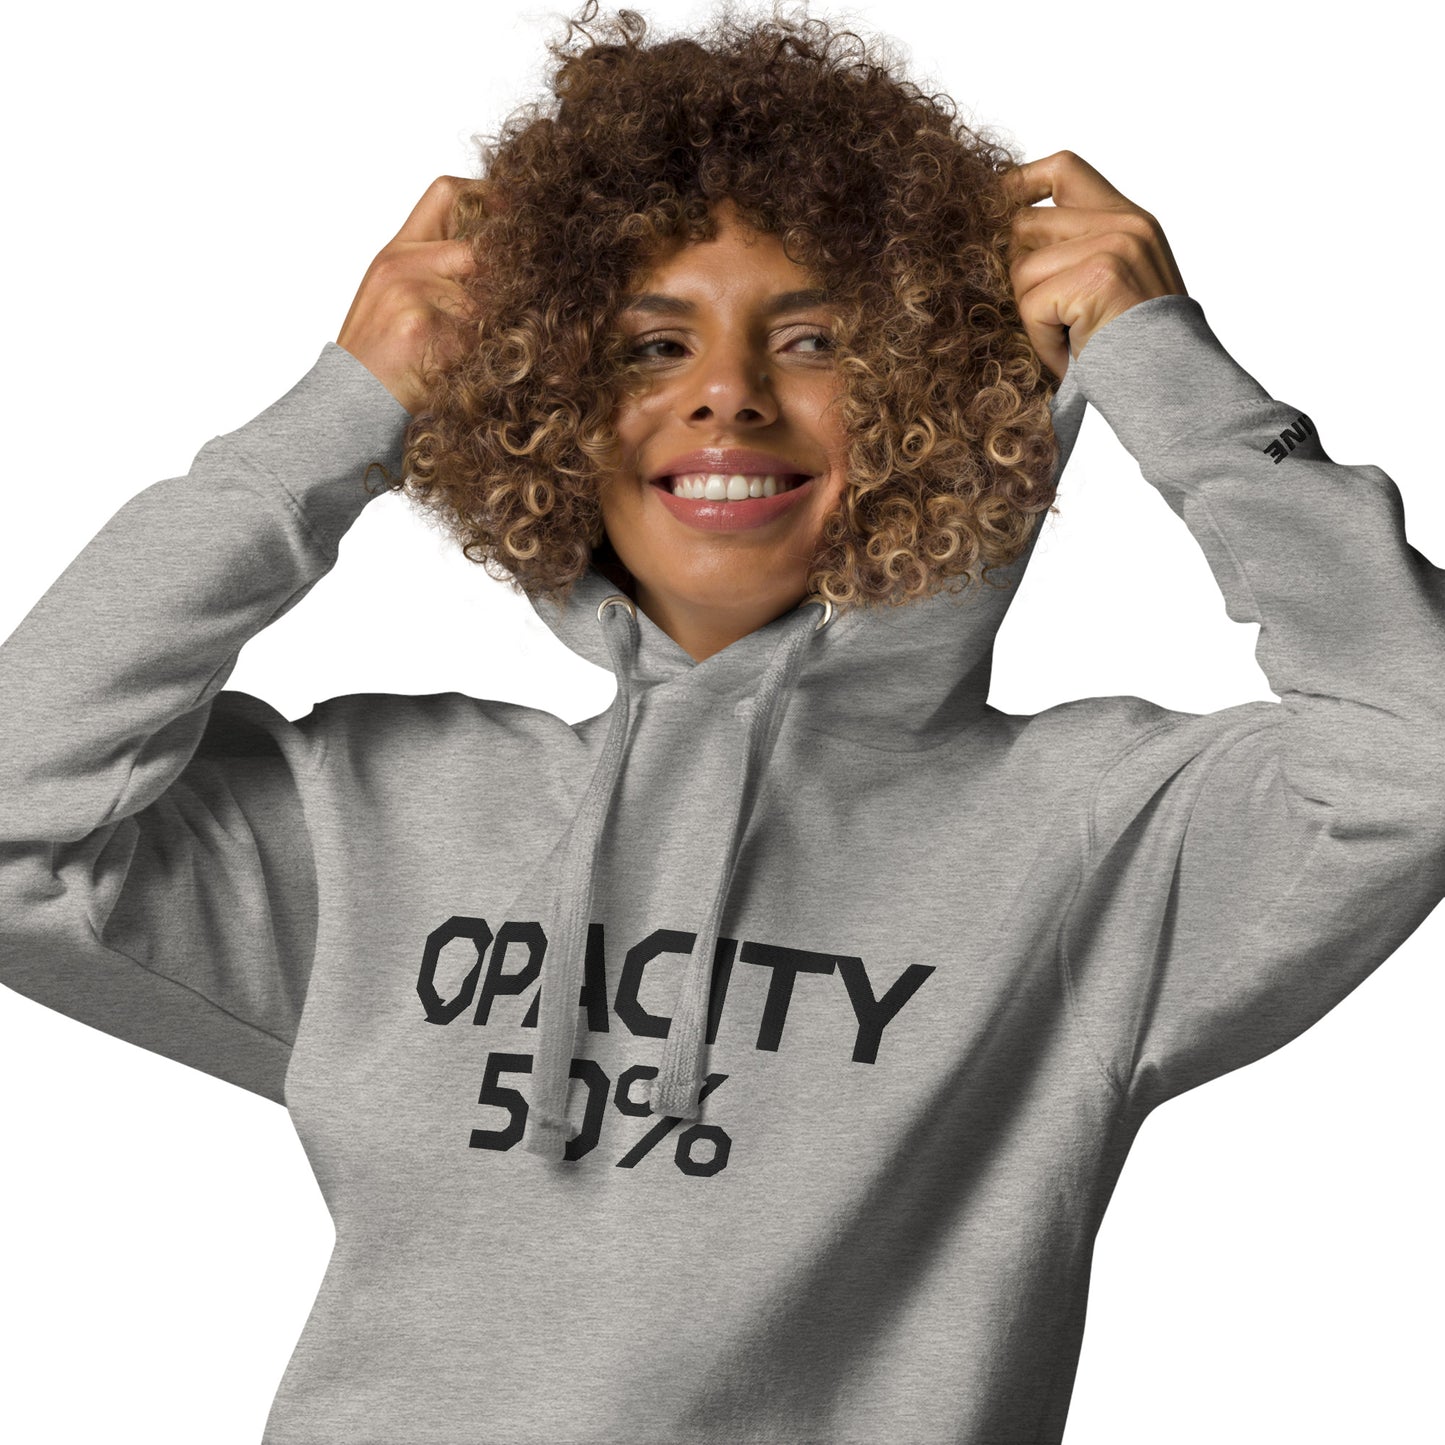 Opacity 50% Large Embroidery Unisex Hoodie